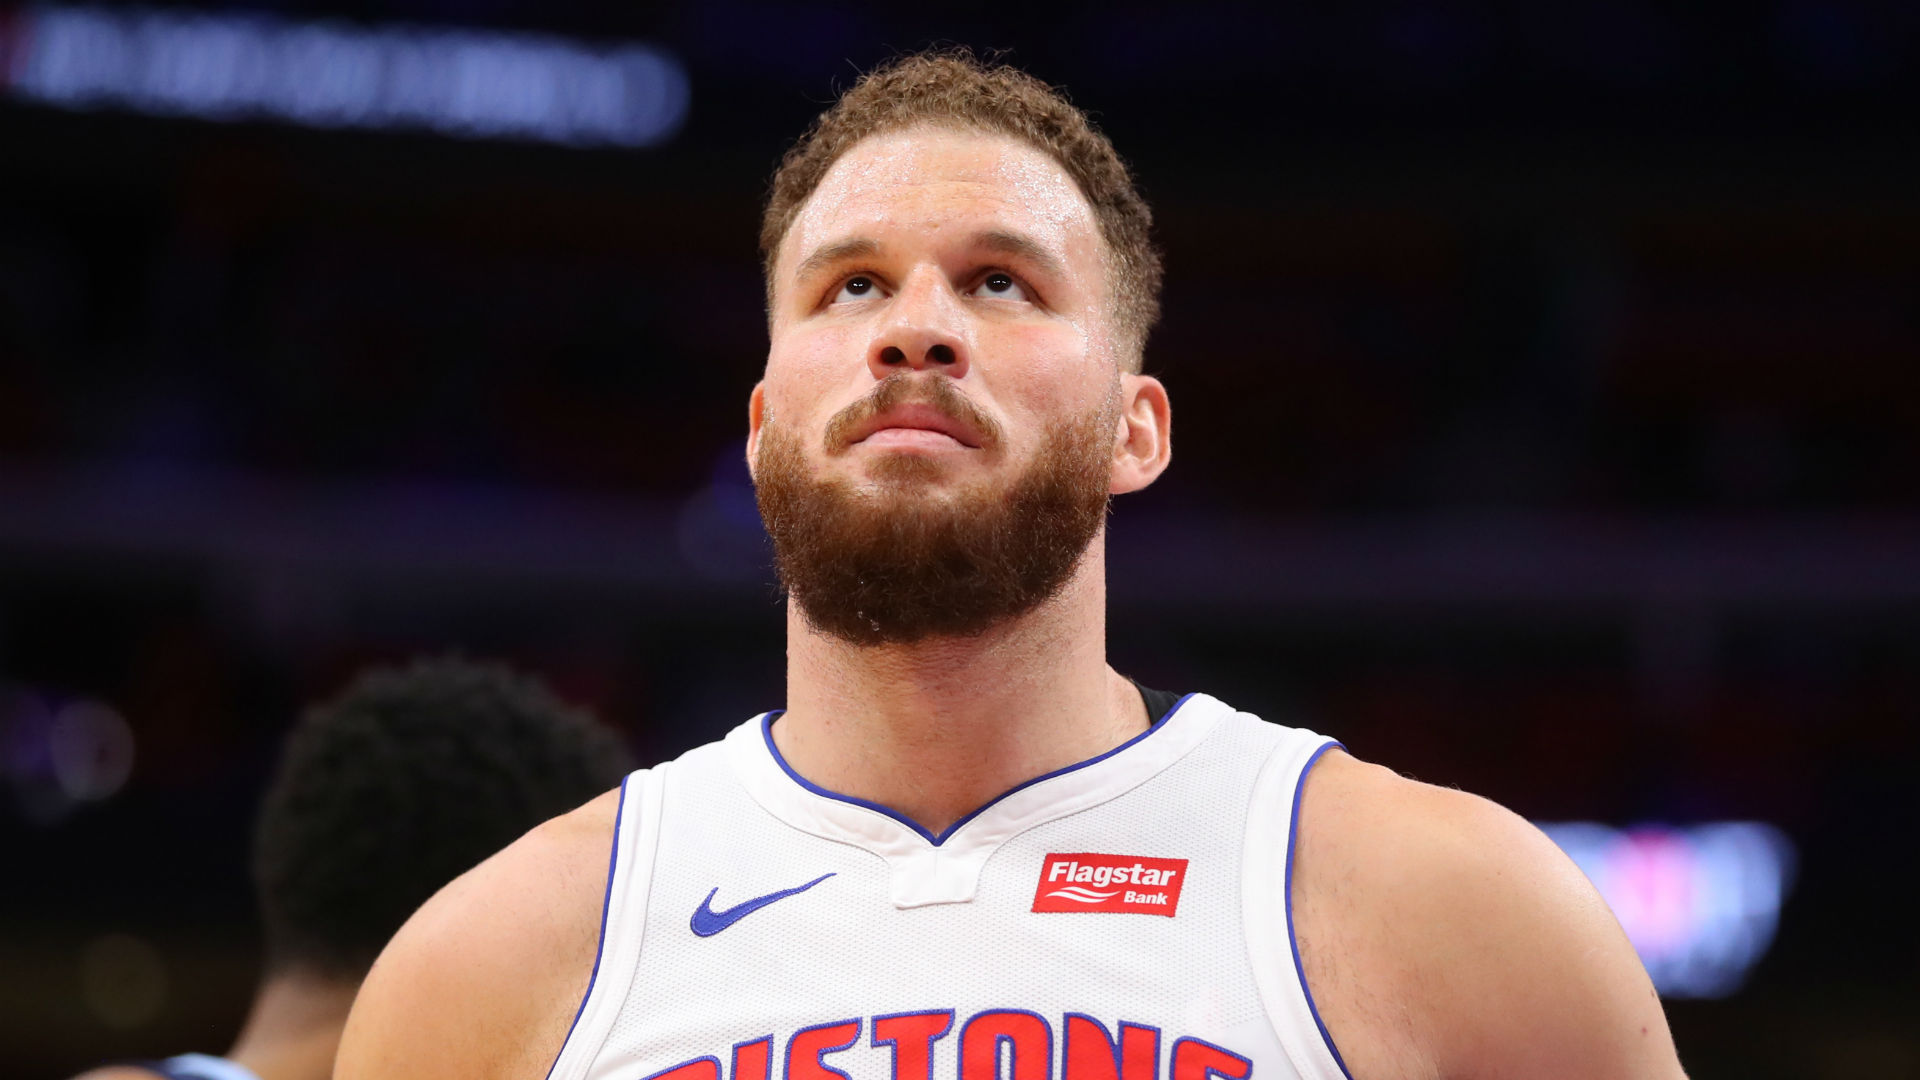 Blake Griffin has not played this season, but the six-time All-Star could be back in action in the near future for the Detroit Pistons.